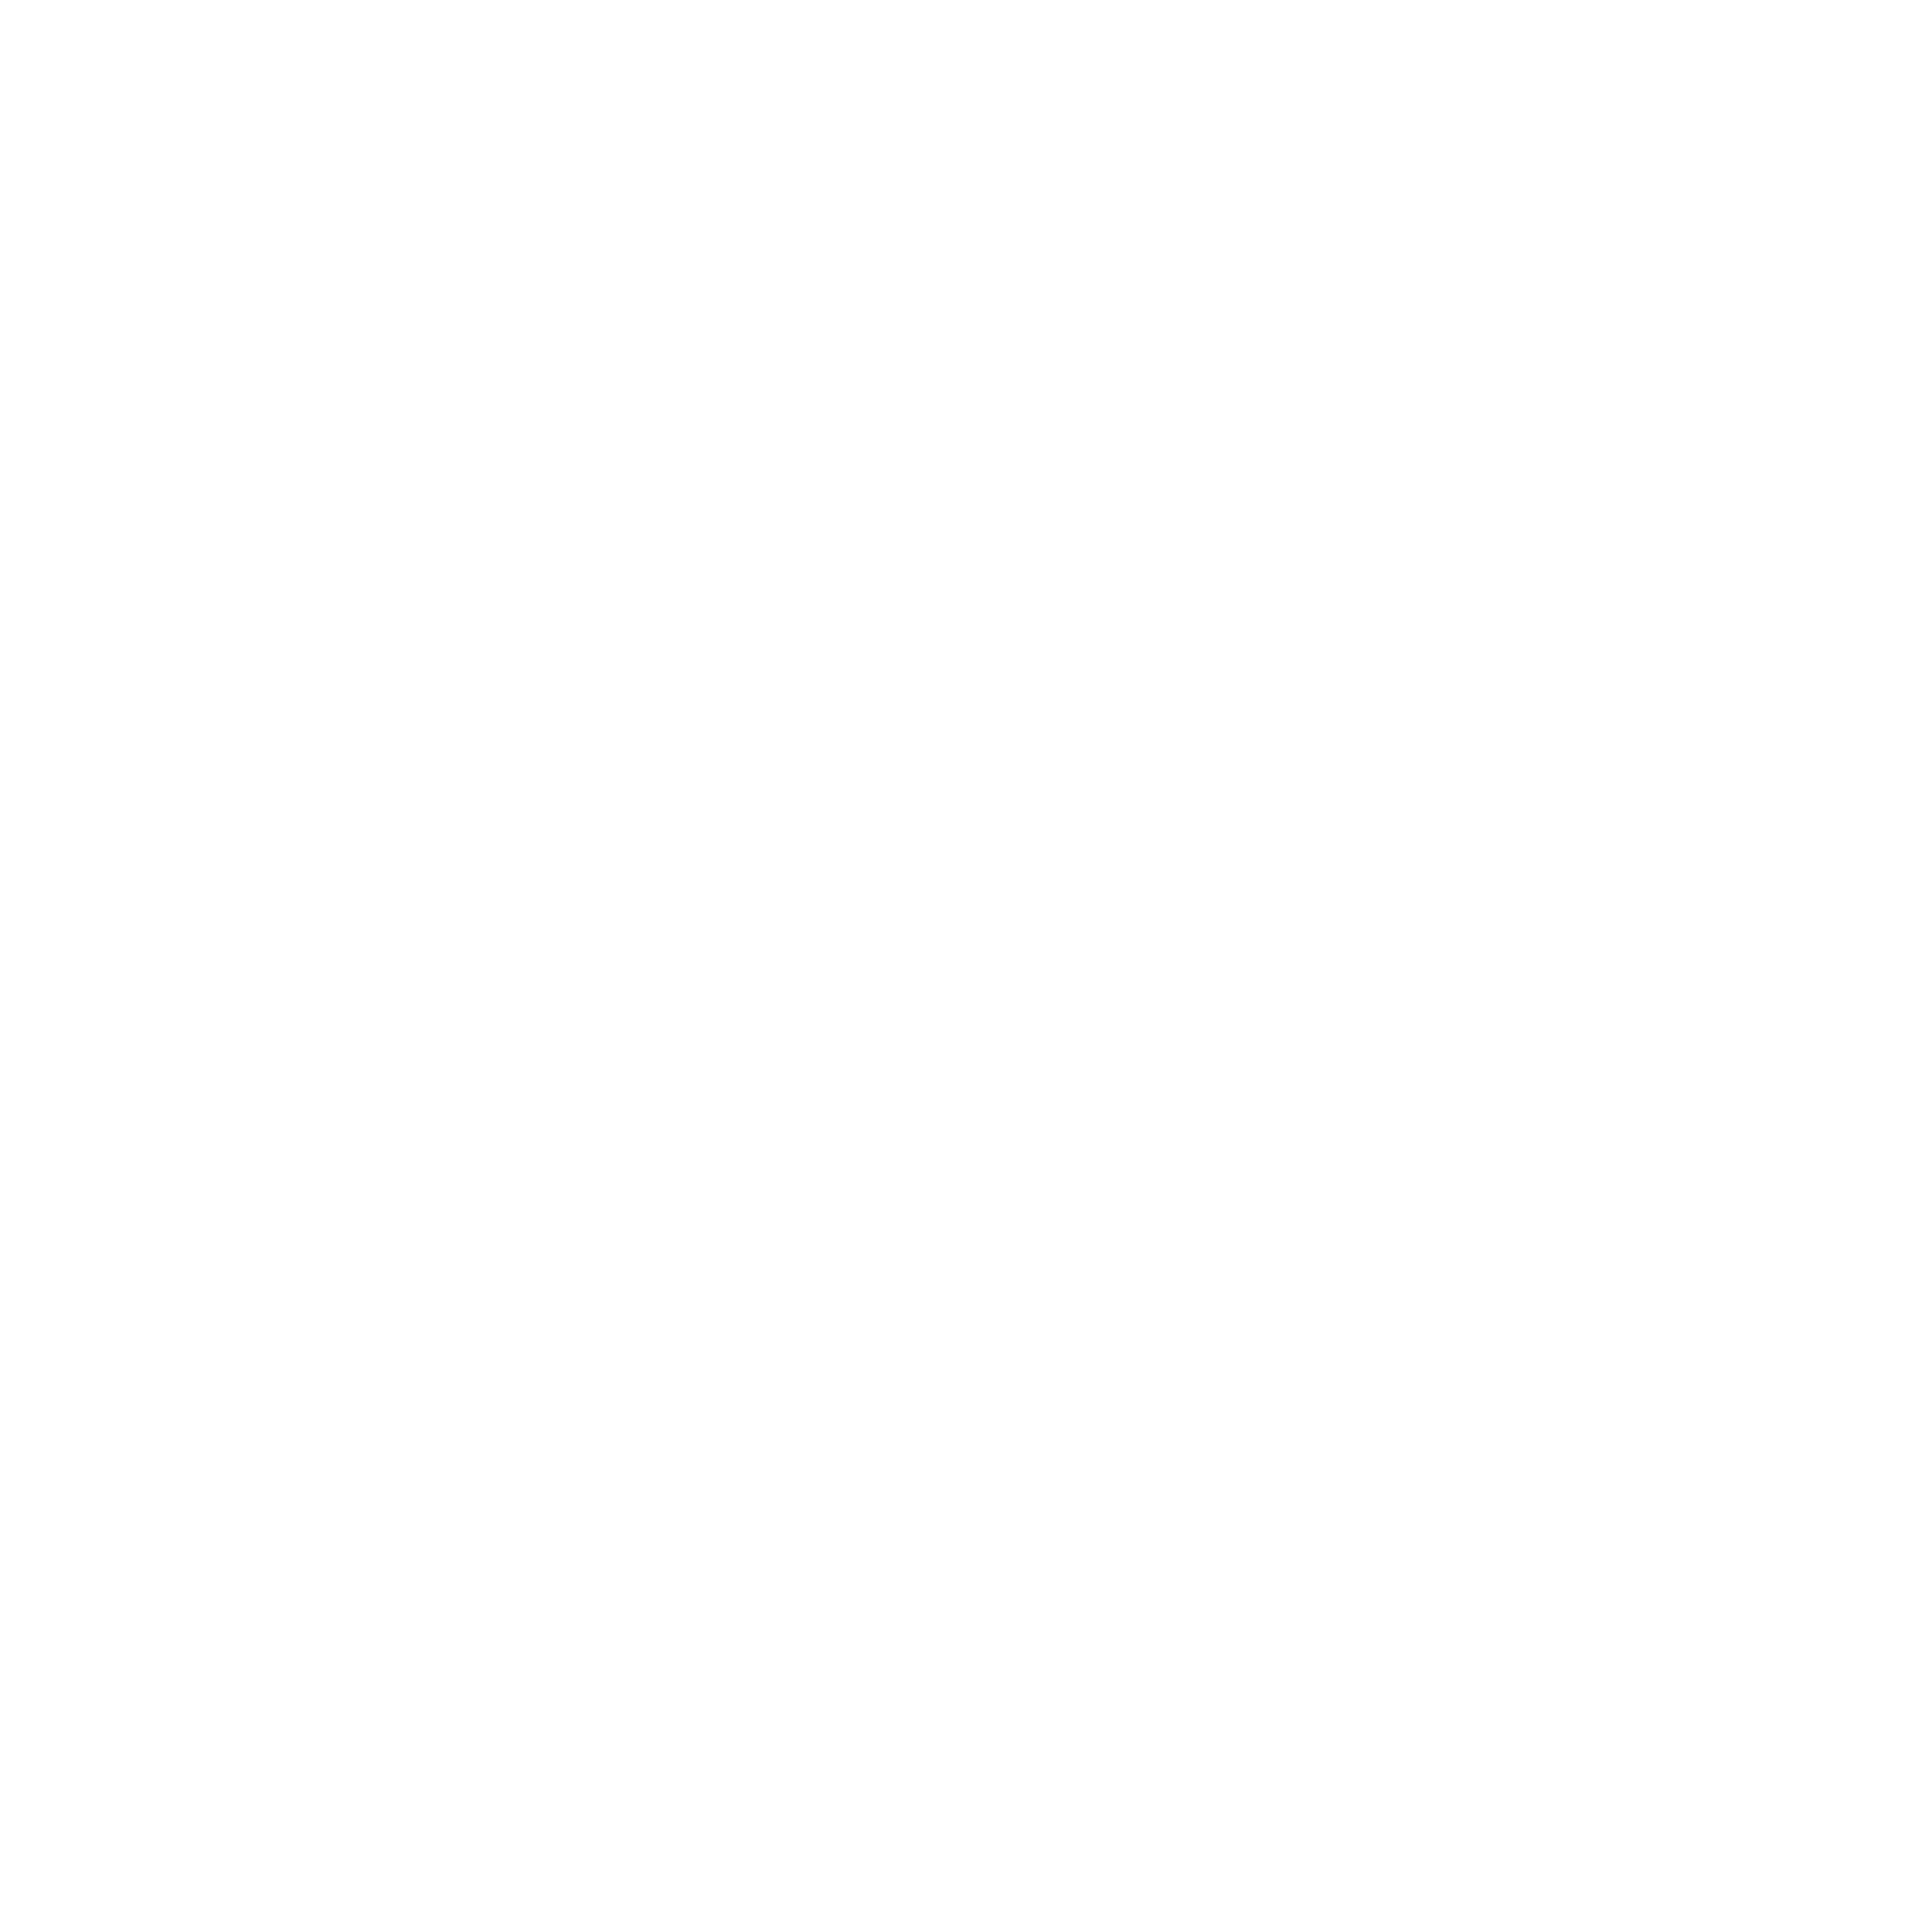 Scape Agency